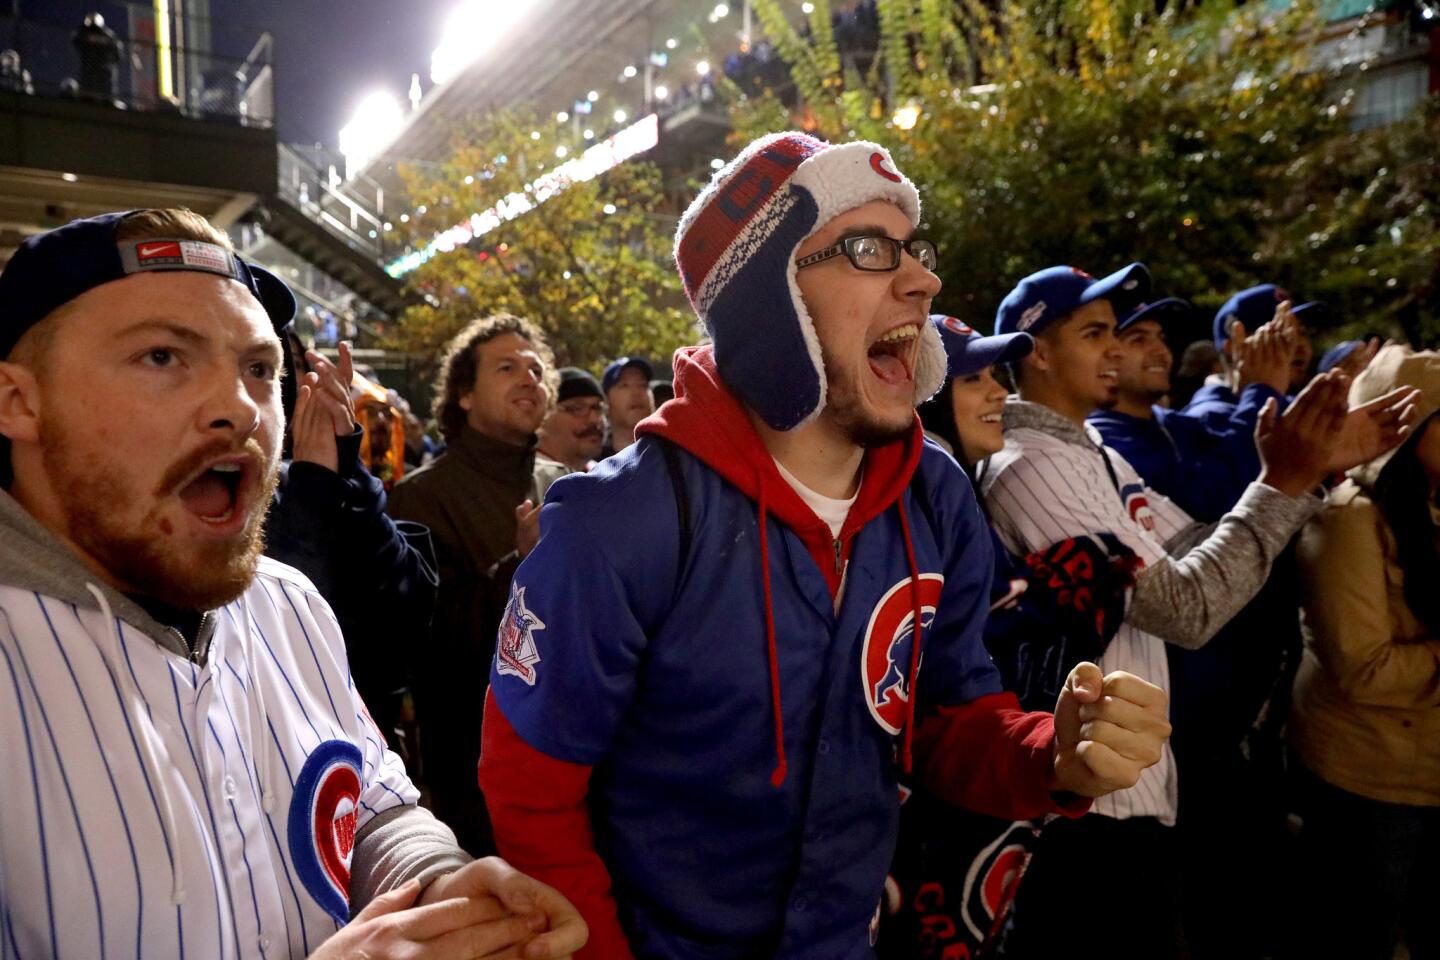 Fans at World Series Game 5